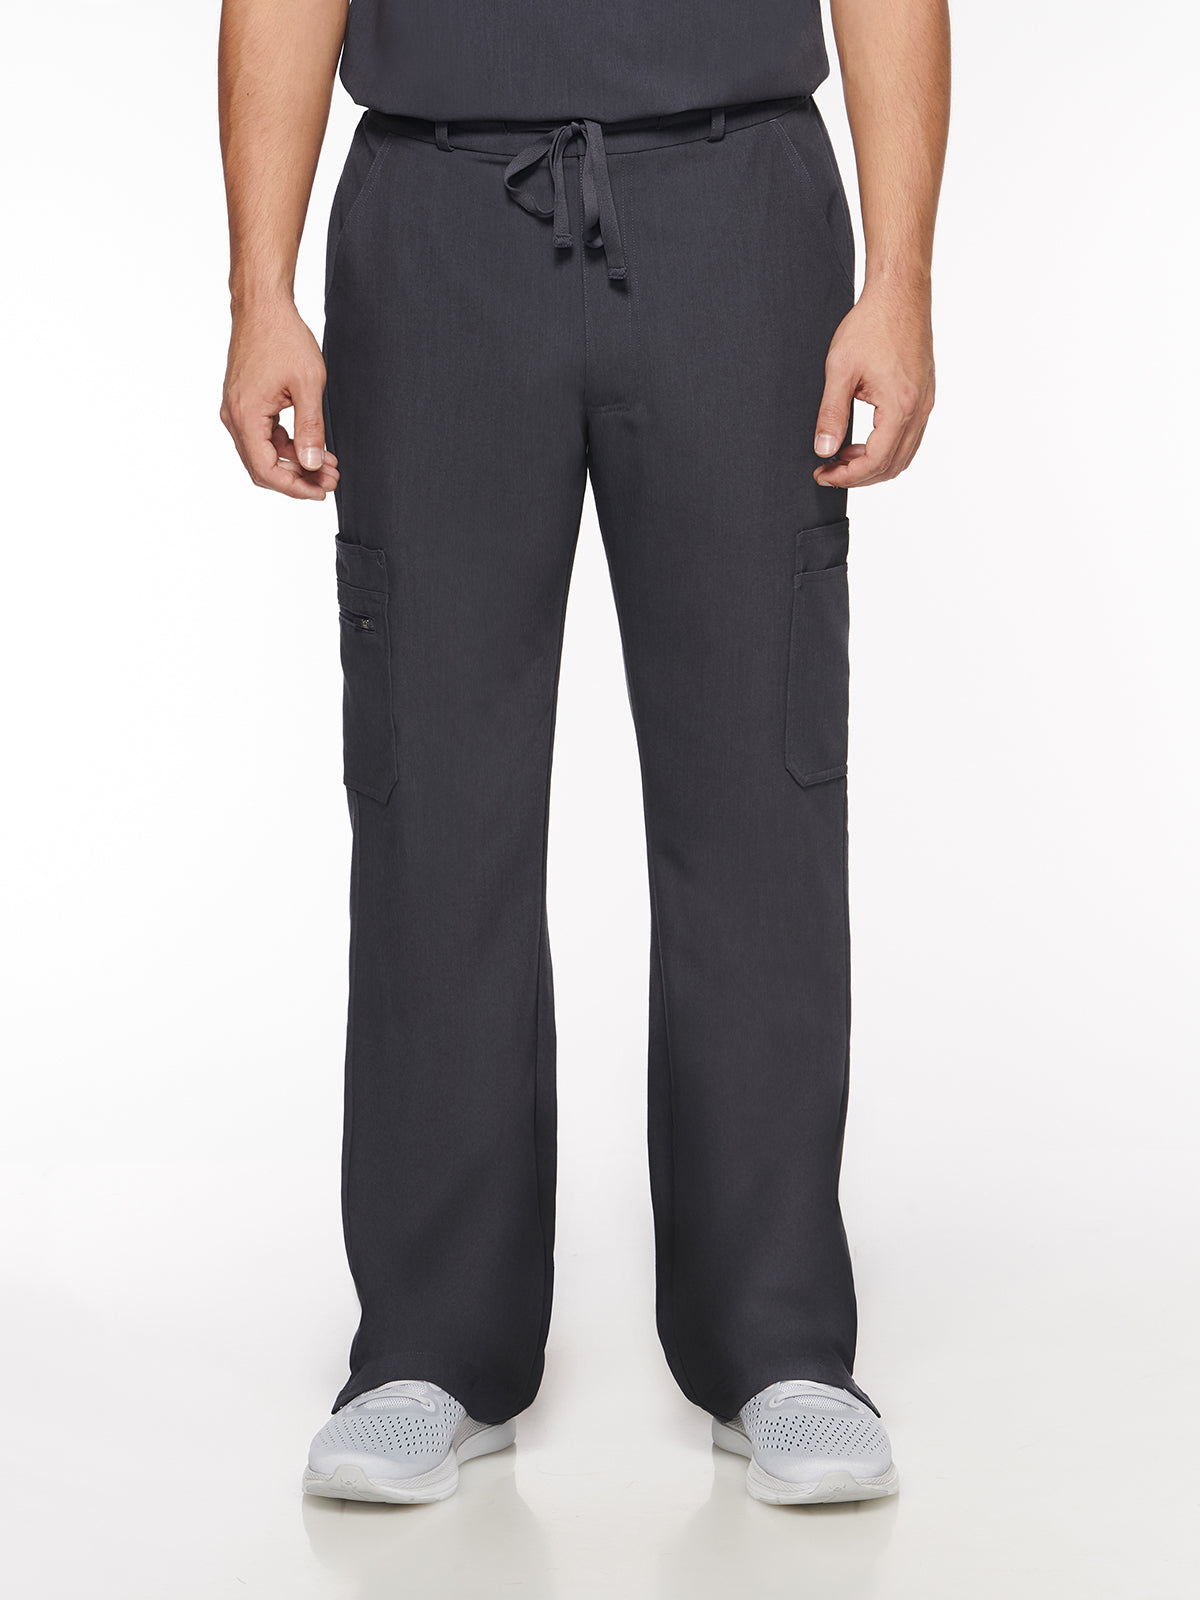 Java Mens Pant French-Fly Pant with 9 Pockets (96001)